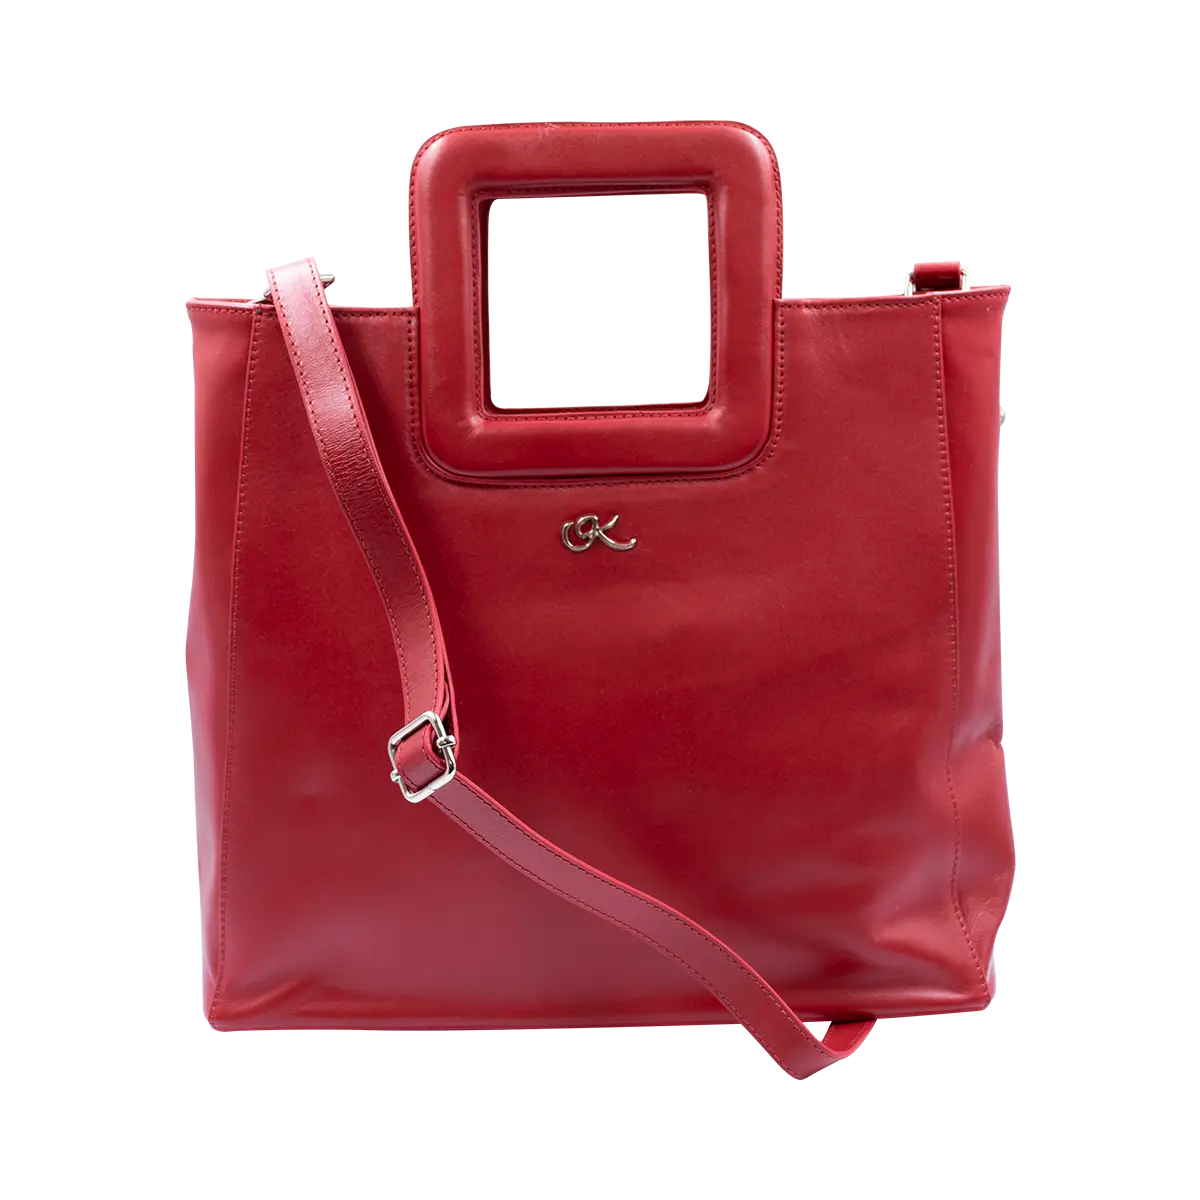 large red leather print handbag with a square handle. Accessory for women in San Diego, CA.